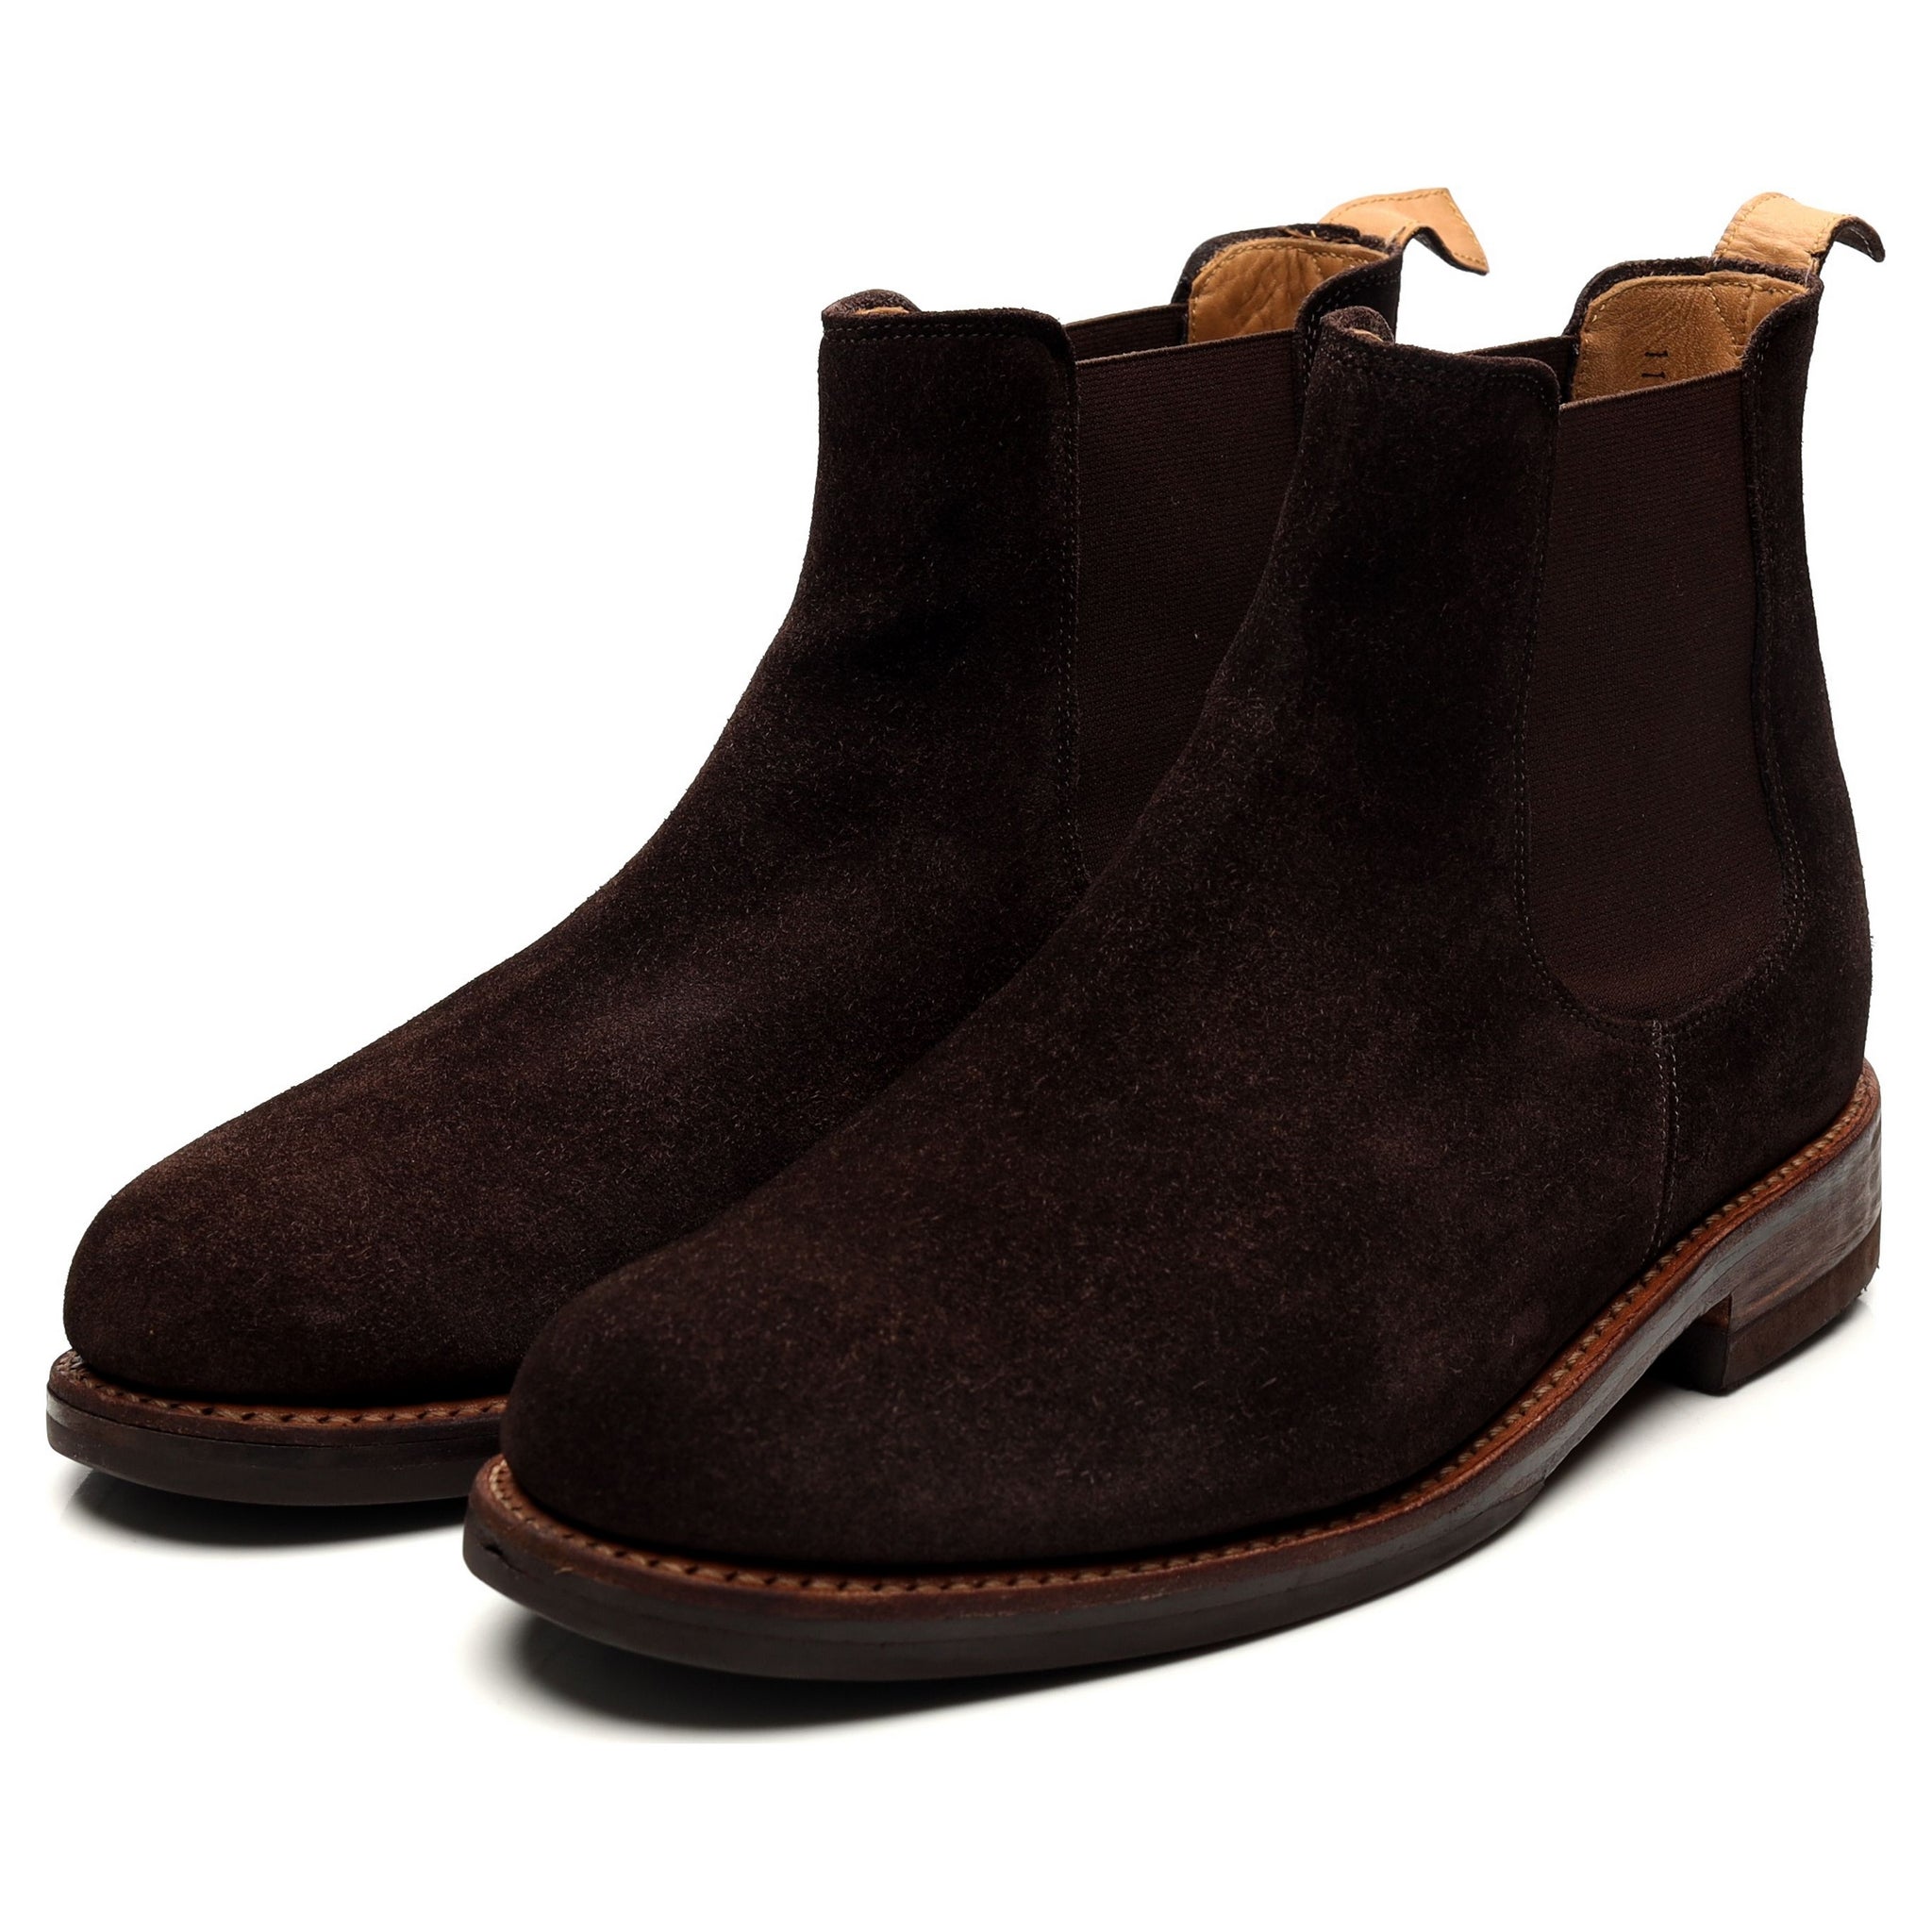 Dark Brown Suede Chelsea Boots UK 8.5 G Abbot's Shoes